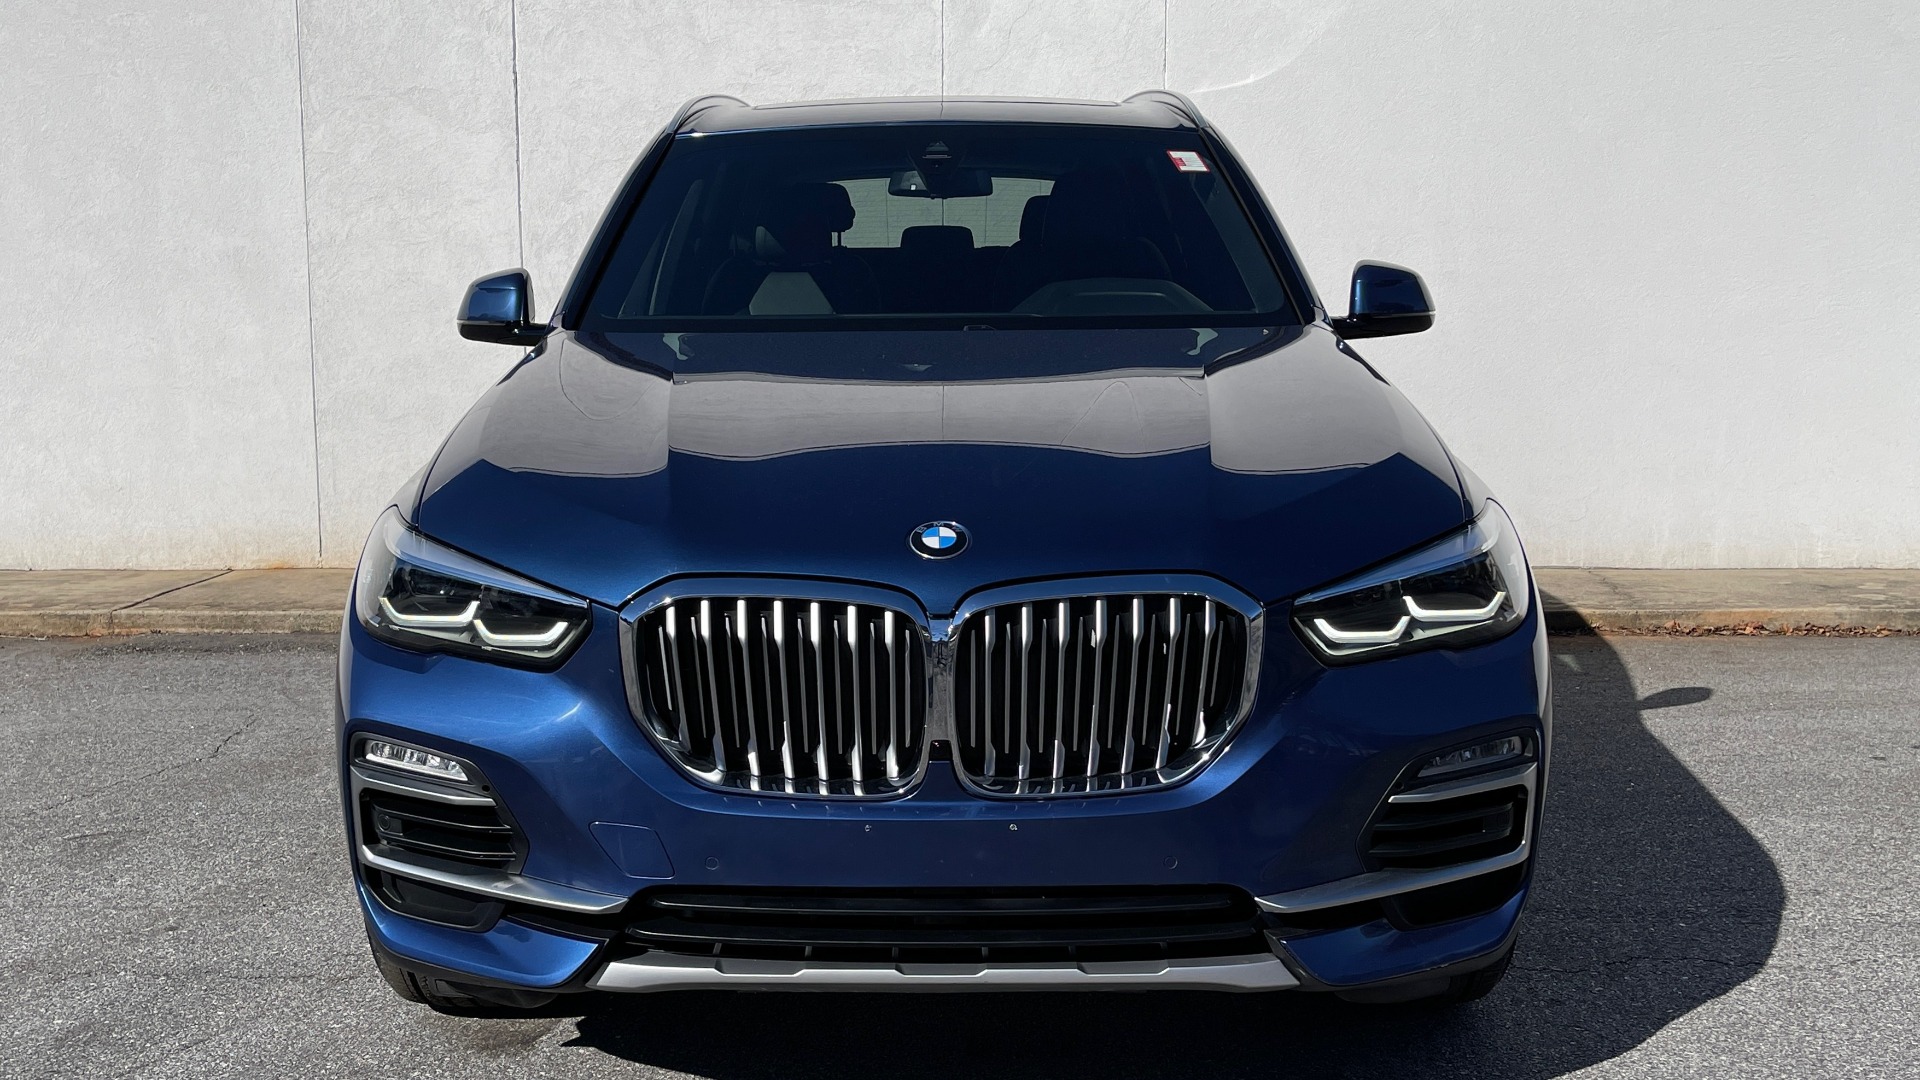 Used 2019 BMW X5 XDRIVE40I / CONVENIENCE PKG / REMOTE START / TOWING / H/K SND / REARVIEW for sale $48,695 at Formula Imports in Charlotte NC 28227 11